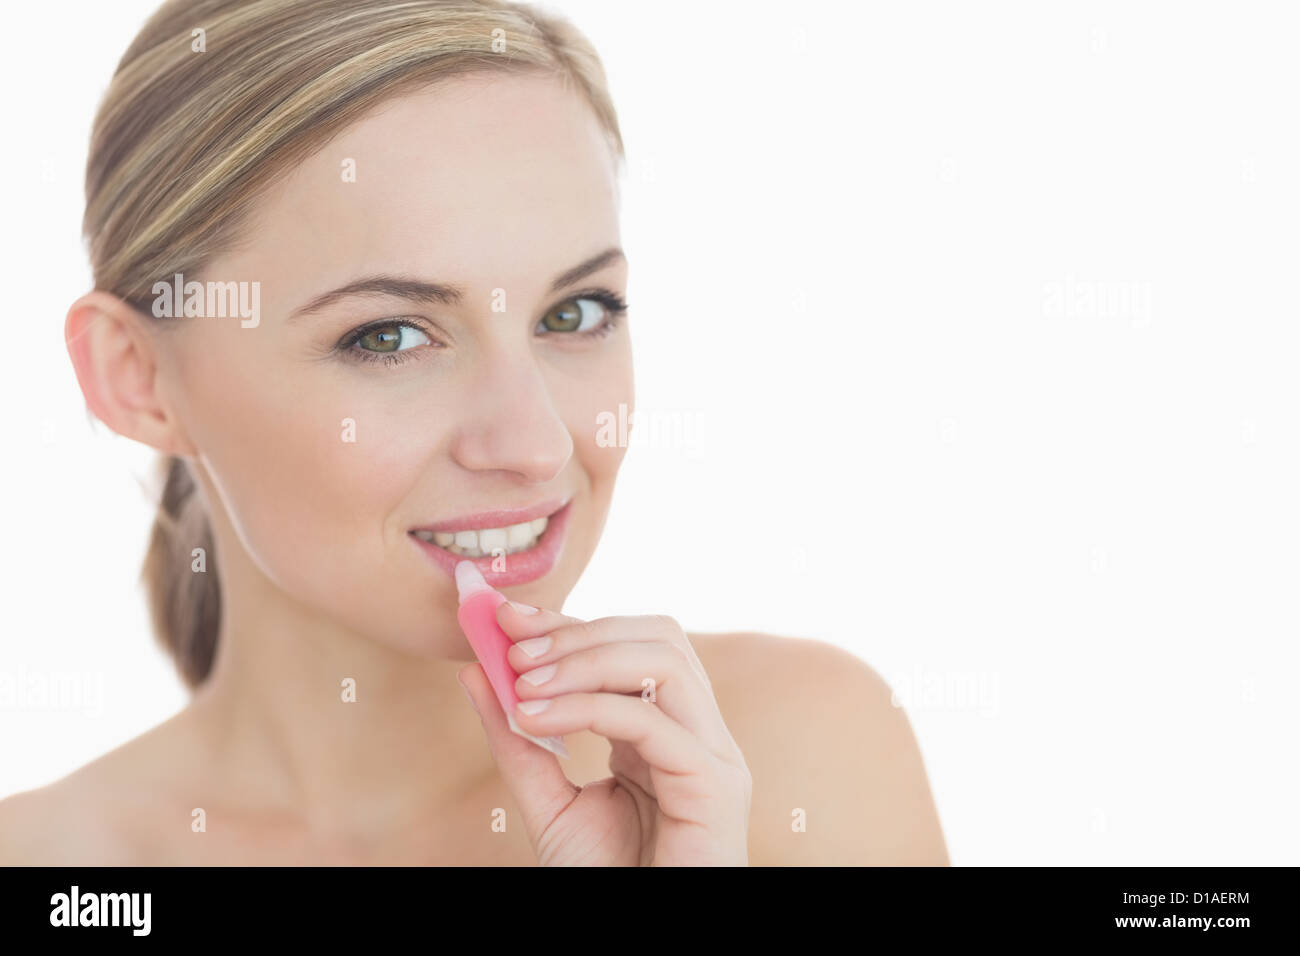 Close-up portrait of young woman applying lipgloss Stock Photo